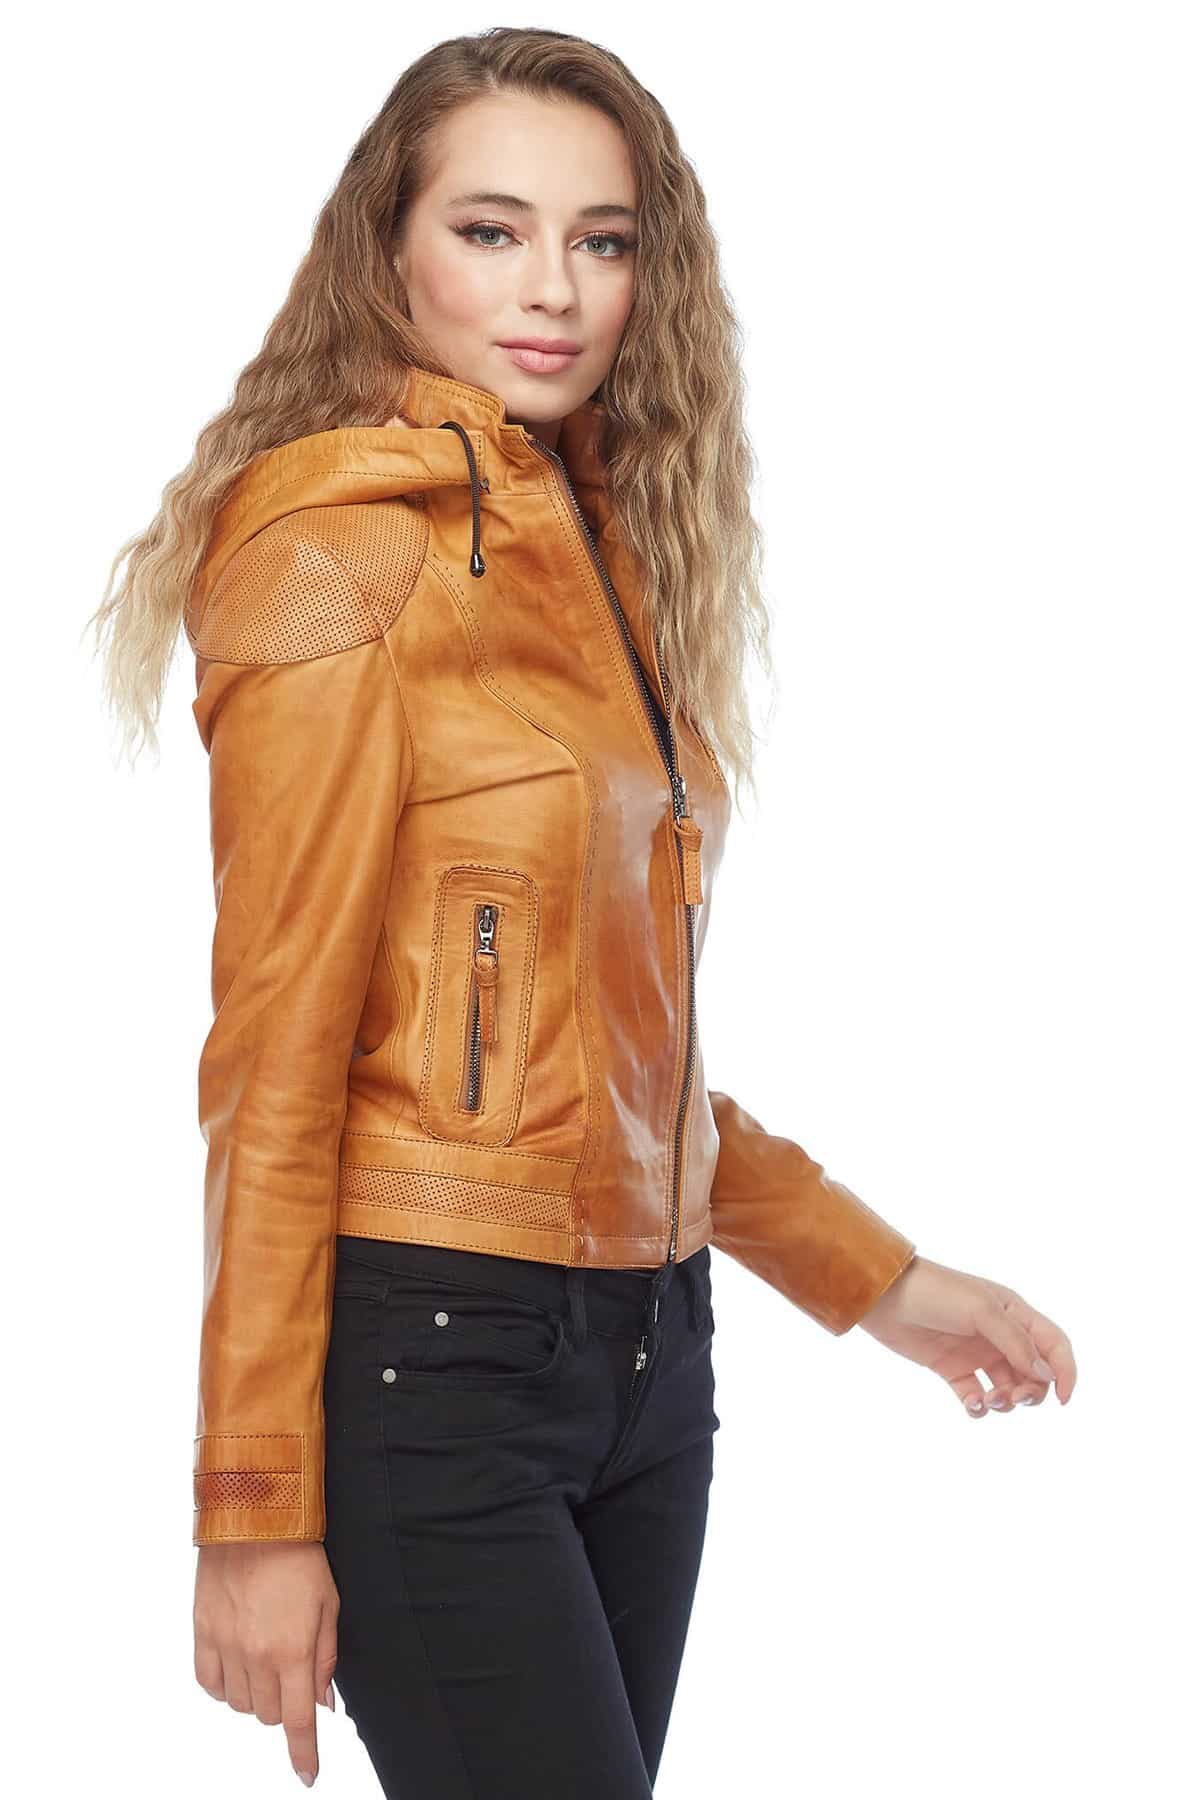 Jessie Women's 100 % Real Brown Leather Hooded Jacket